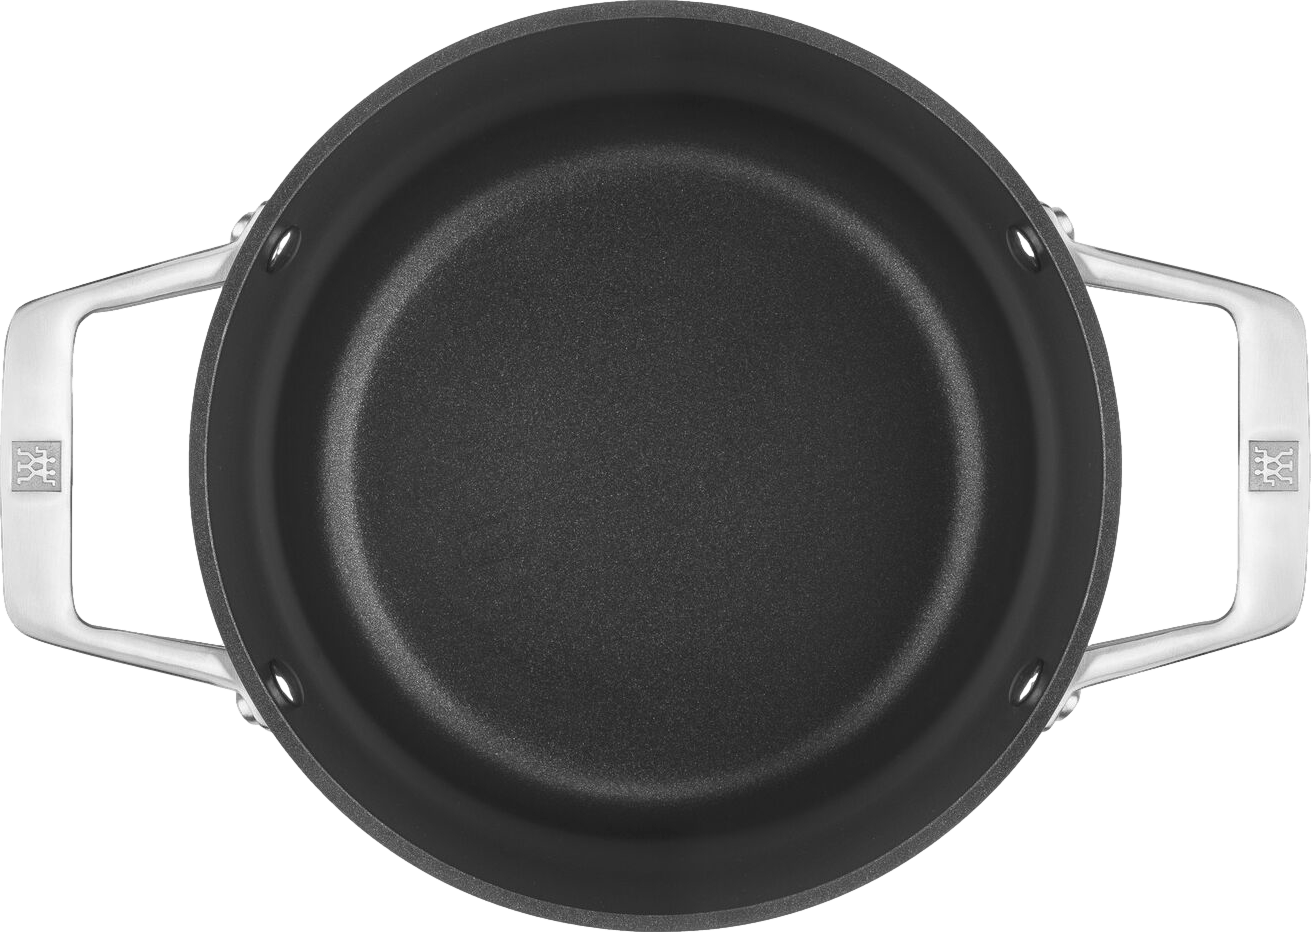 ZWILLING Motion 8 Non-Stick Hard-Anodized Fry Pan + Reviews